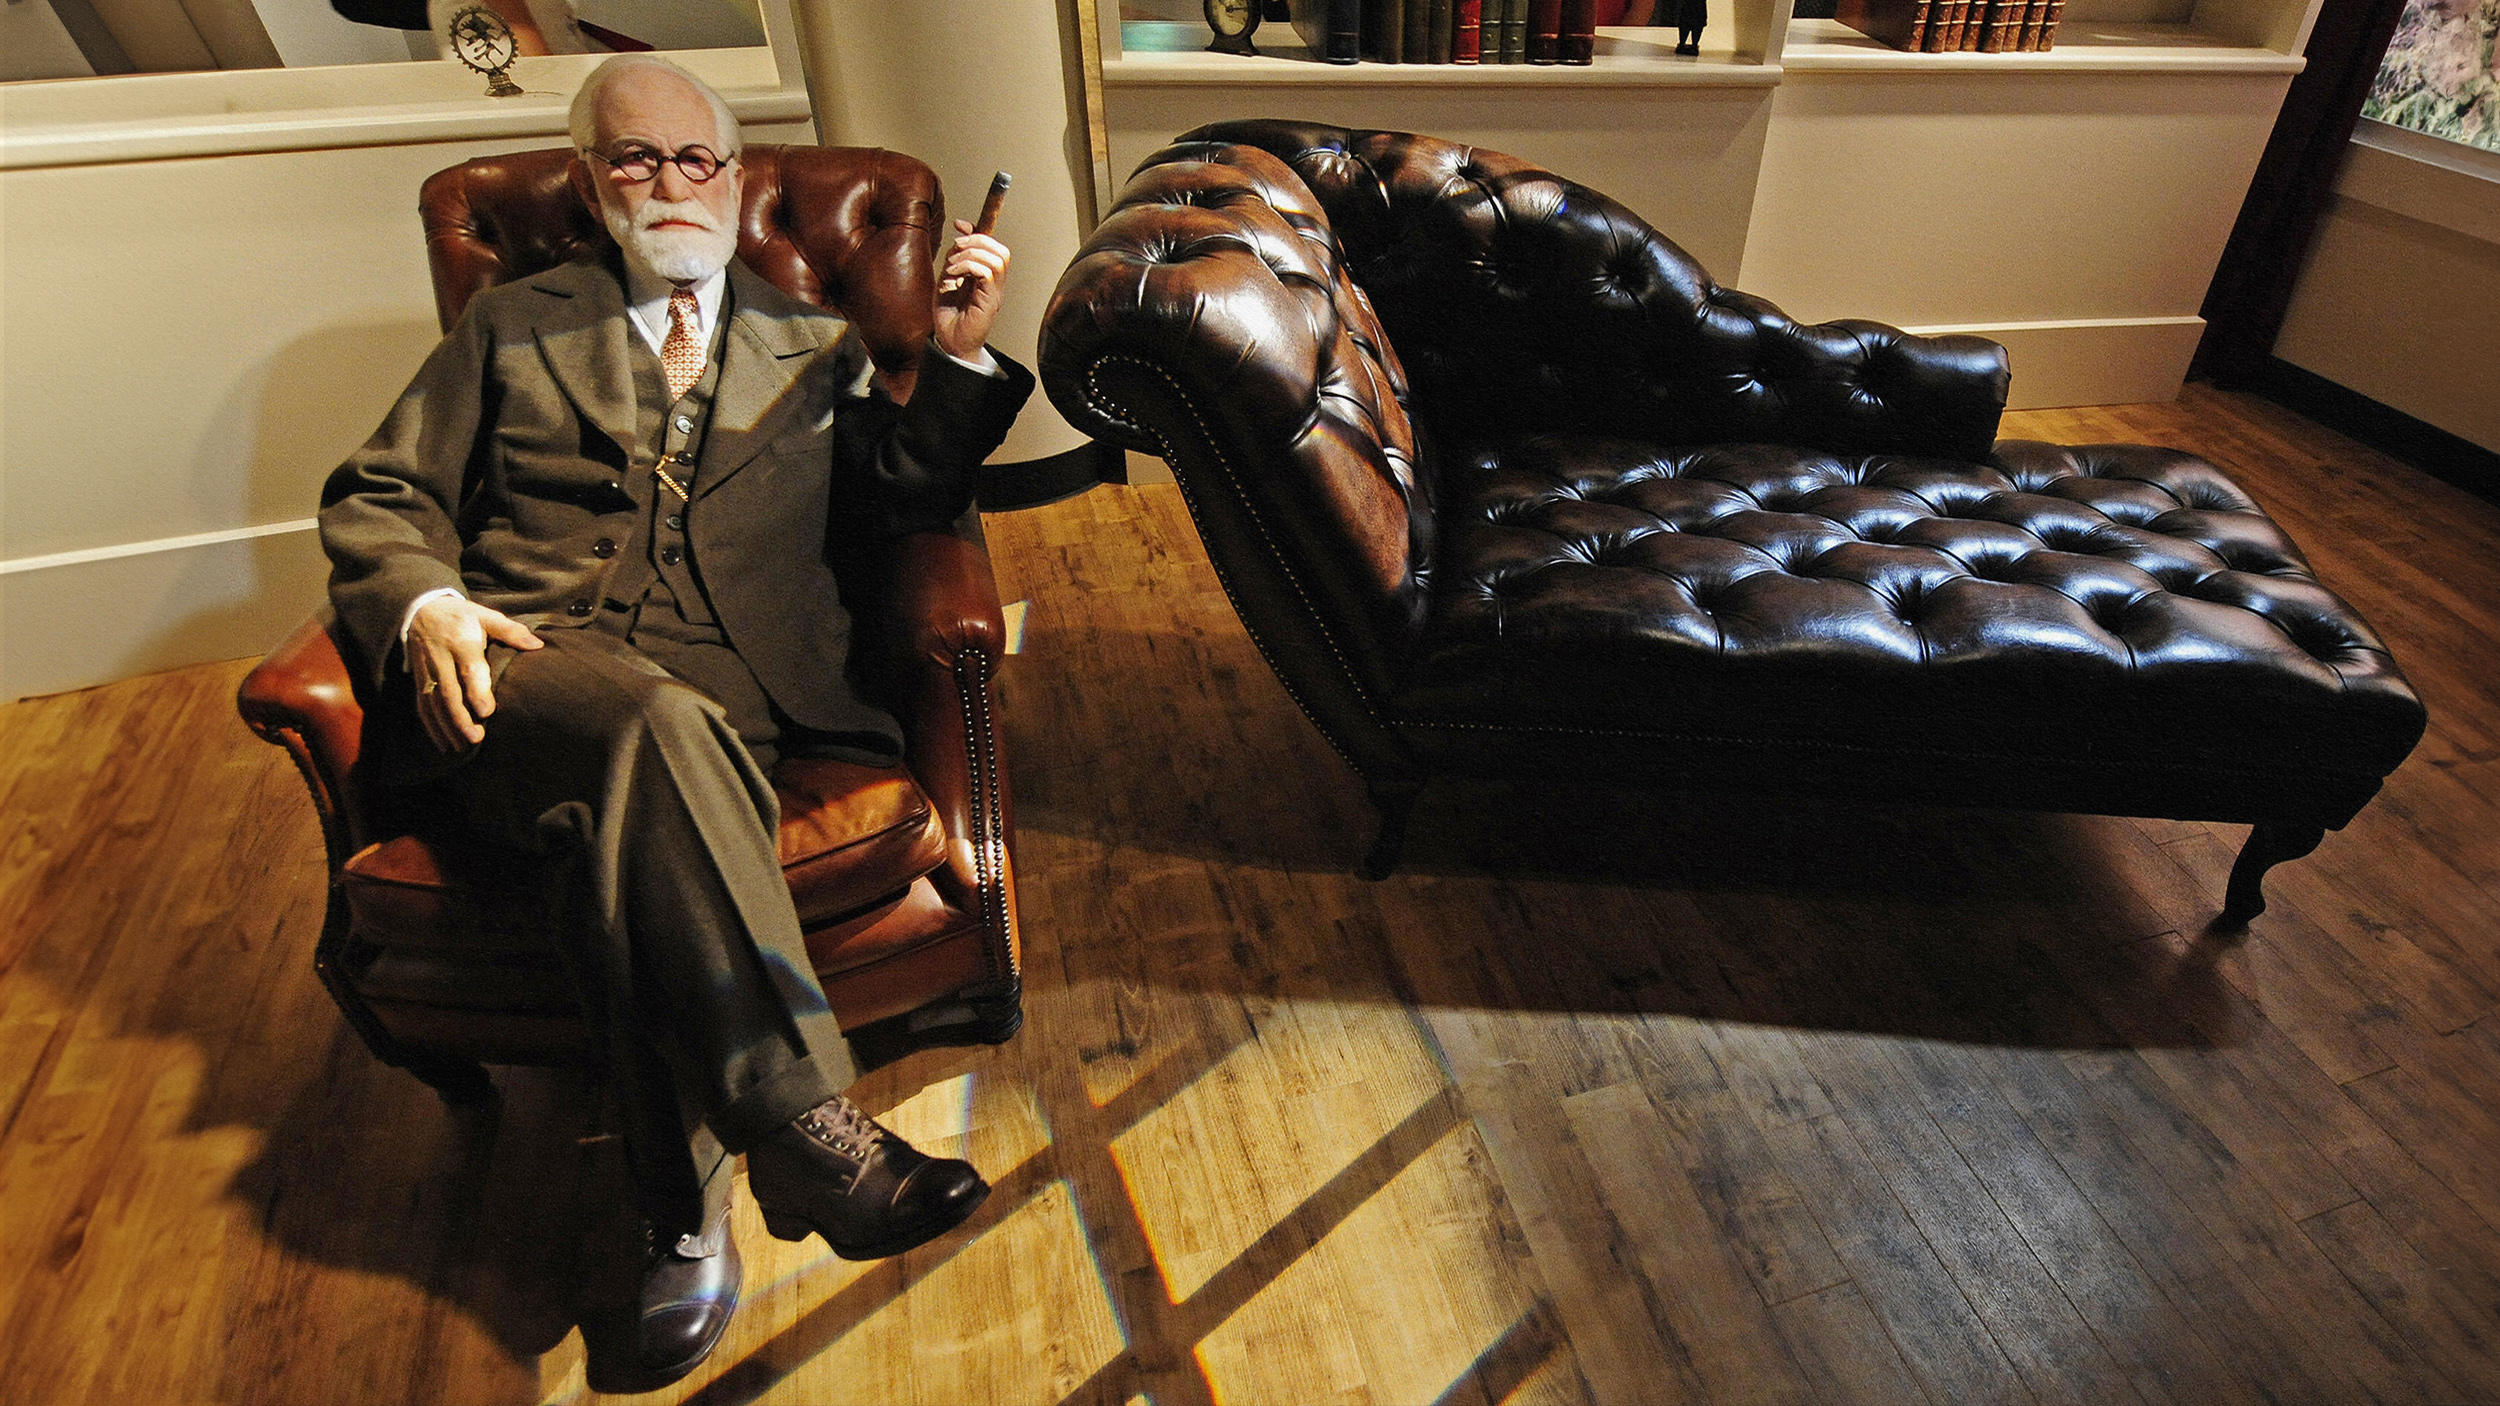 A man sitting in a leather chair, contemplating psychology.